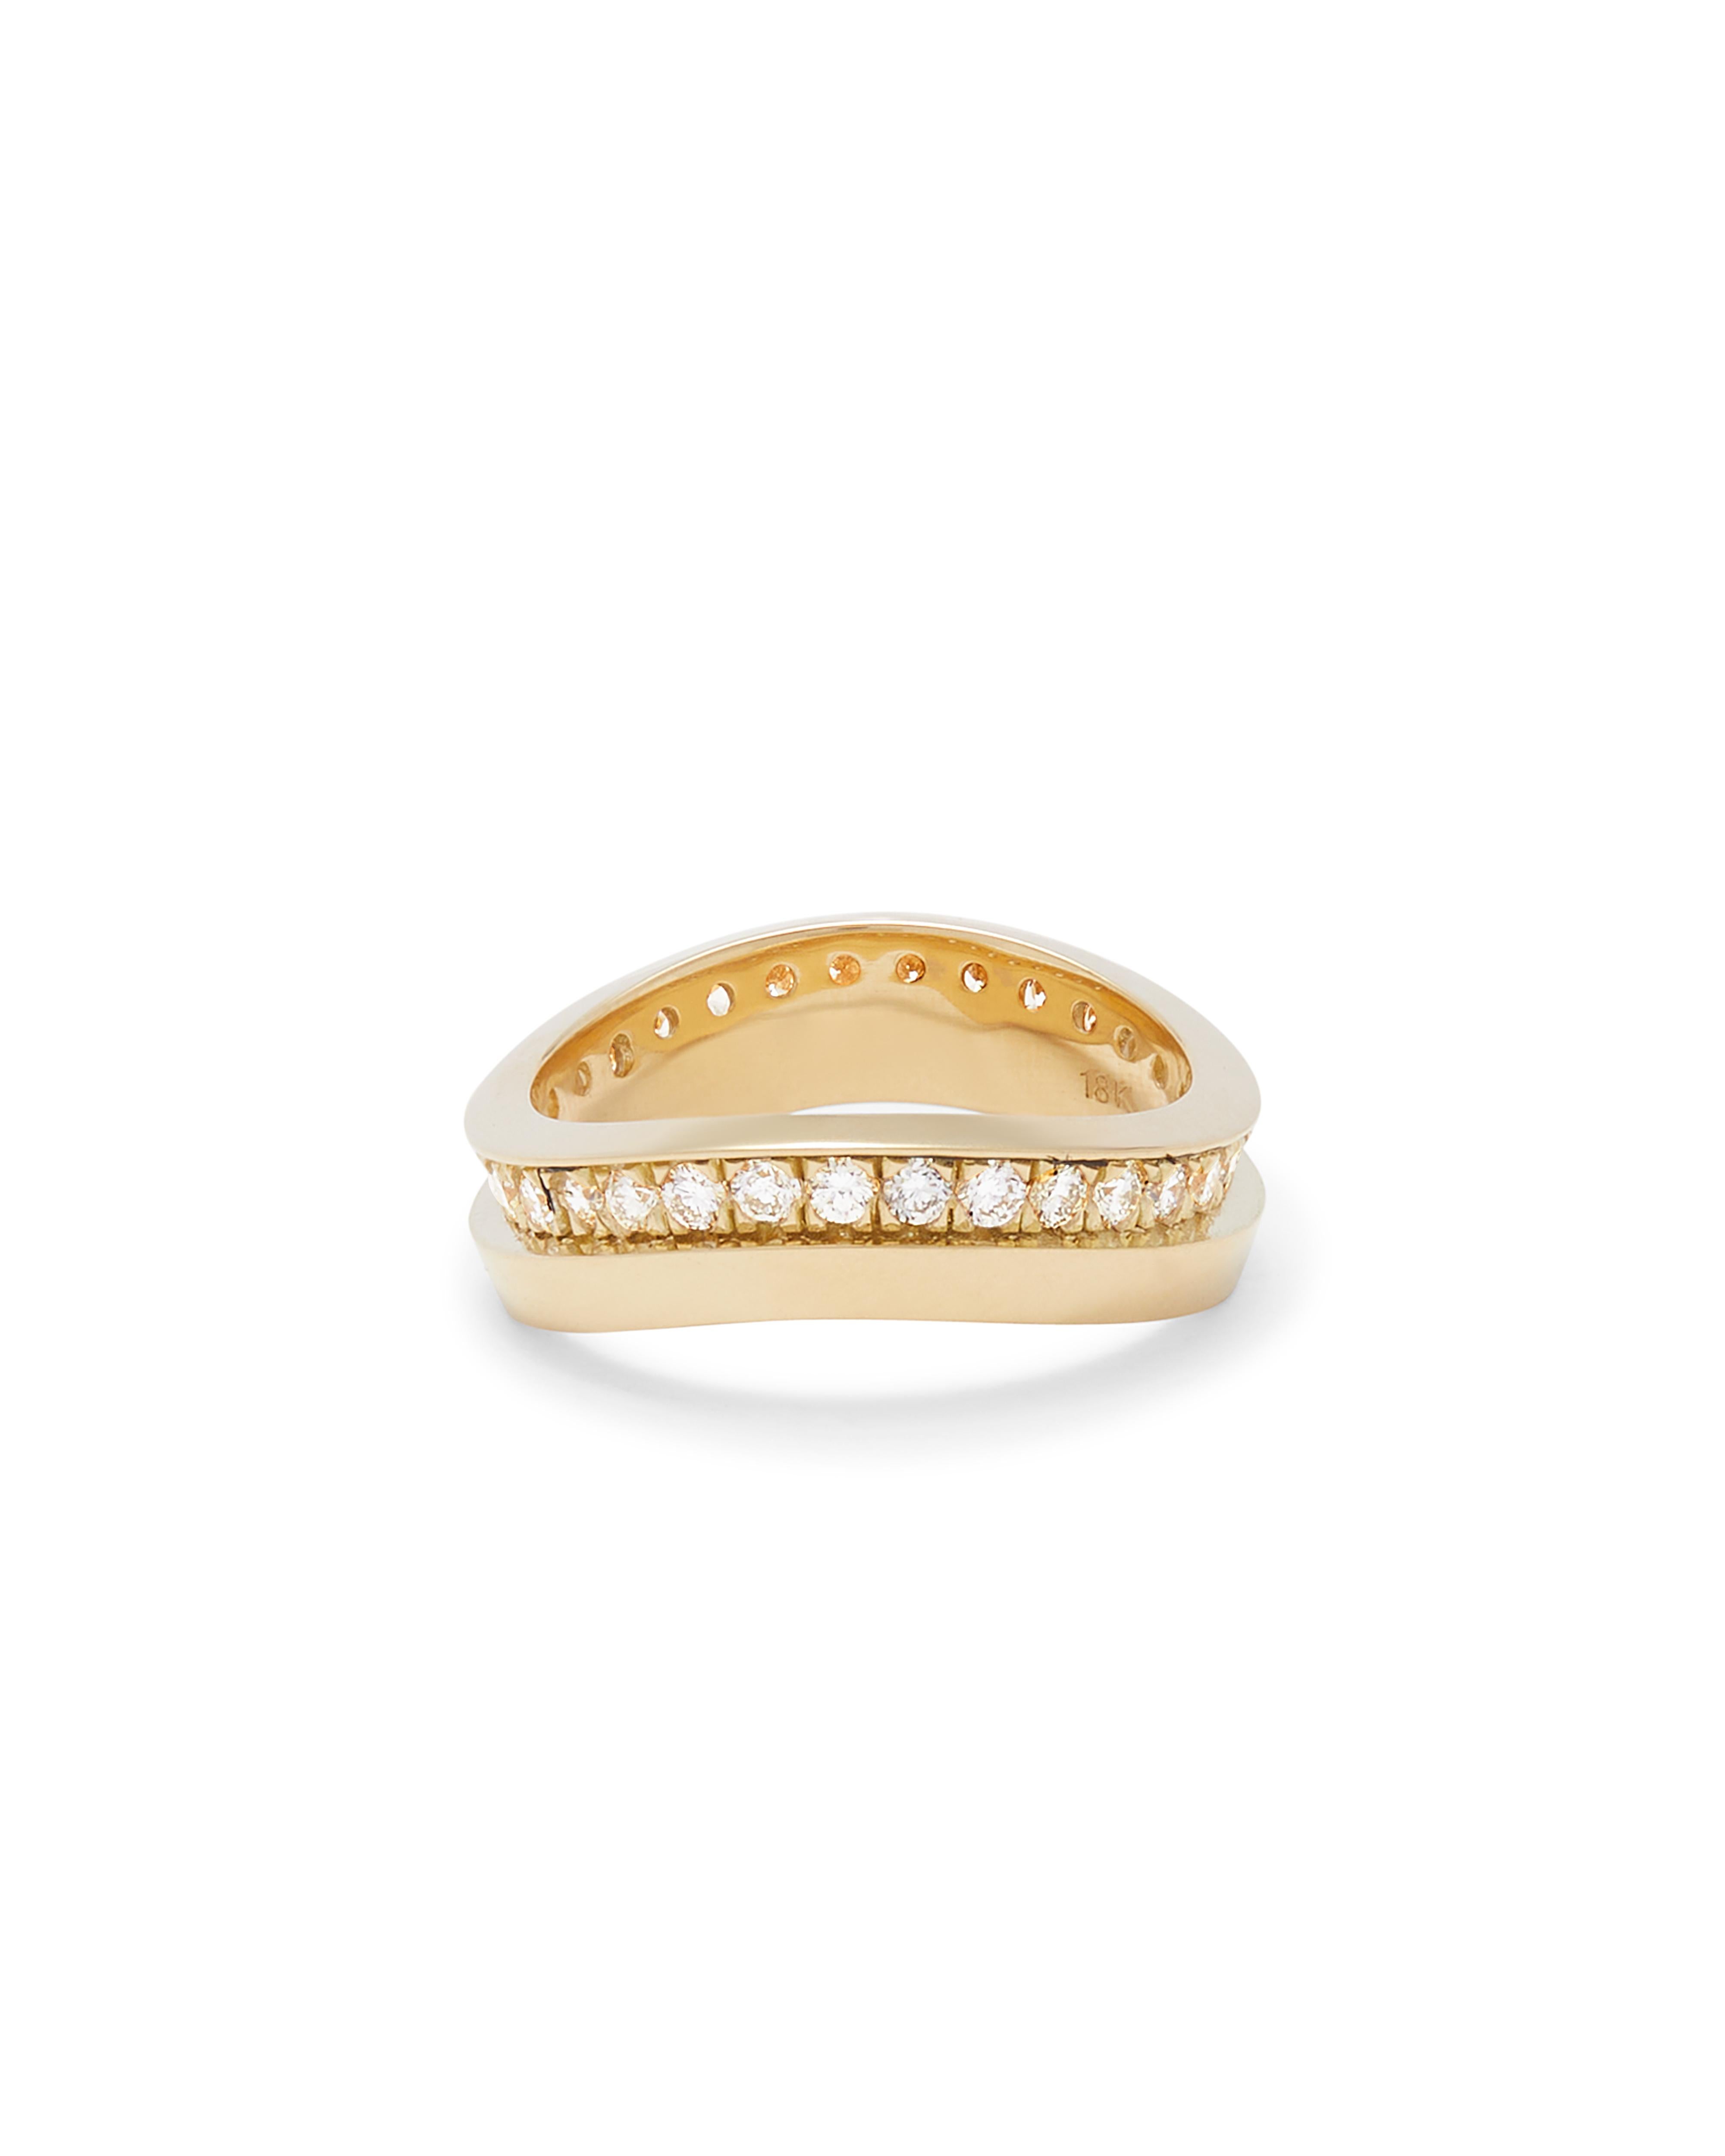 Contemporary Casey Perez Tiered 18K Gold and Diamond Wave Band Stackable Ring - sz 8 For Sale